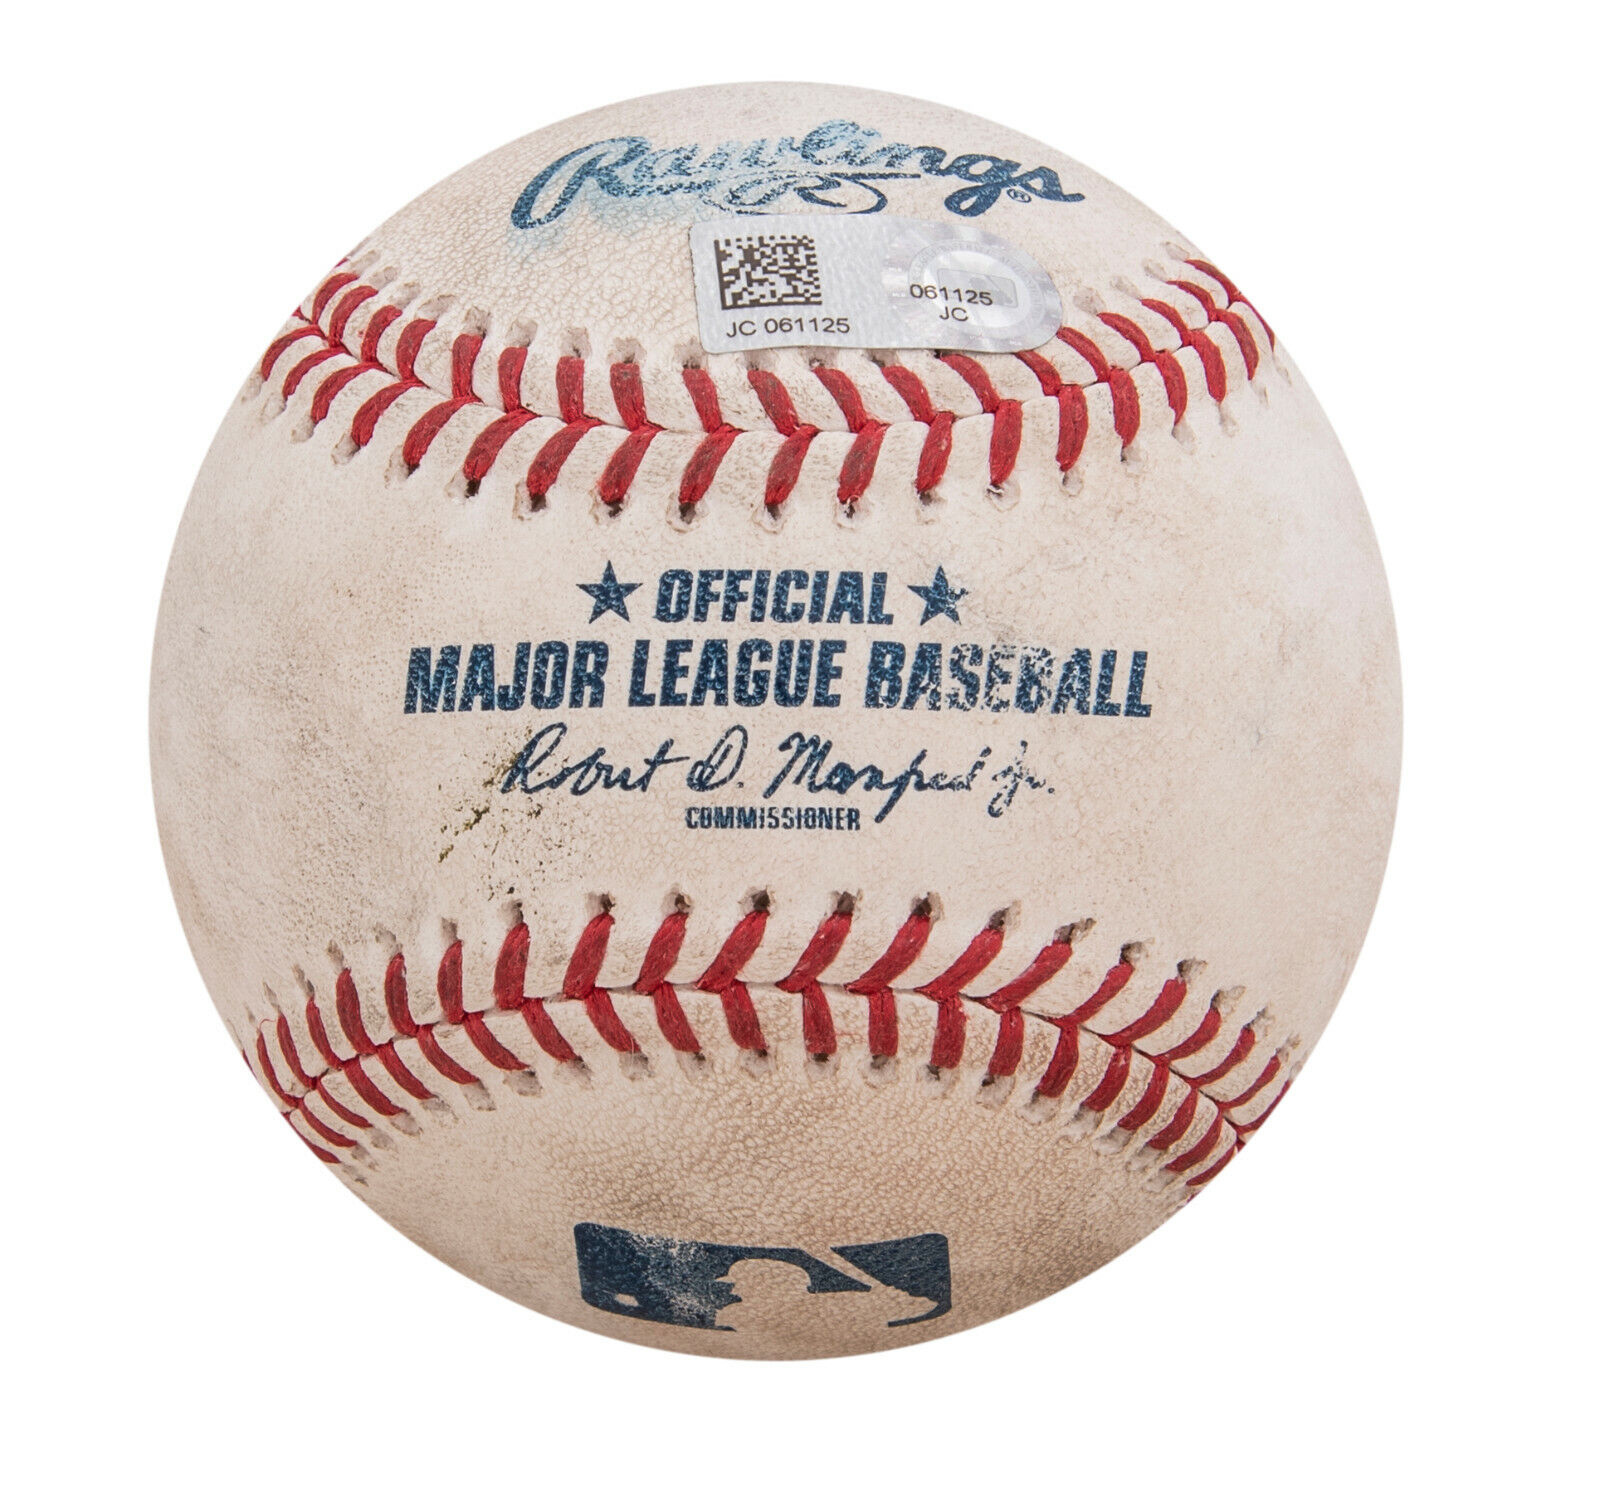 YOENIS CESPEDES GAME USED 1st HOME-RUN EVER HIT BY NL DESIGNATED HITTER 7/24/20